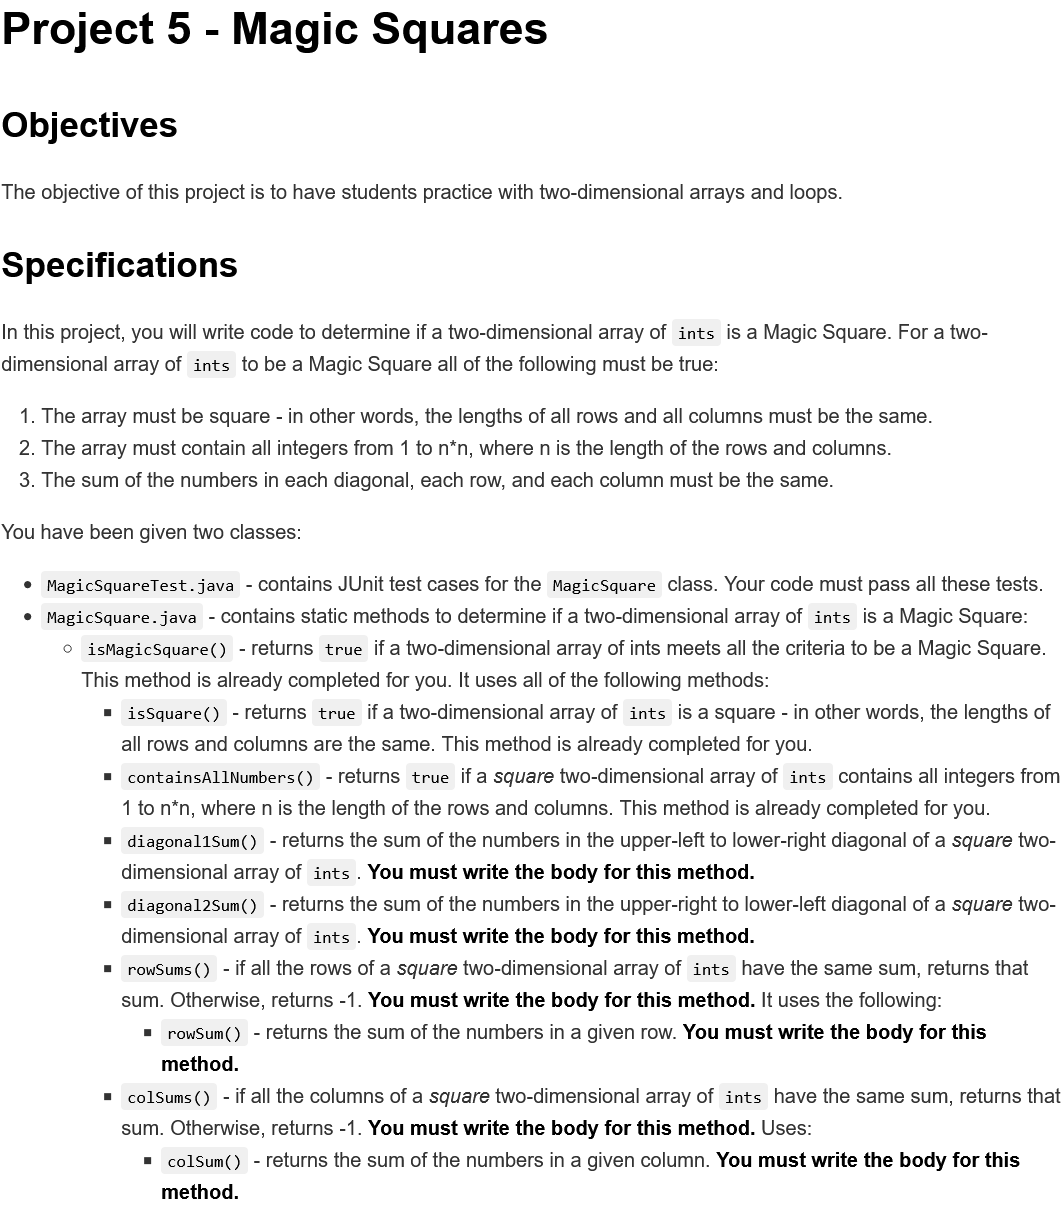 Project 5 - Magic Squares
Objectives
The objective of this project is to have students practice with two-dimensional arrays and loops.
Specifications
In this project, you will write code to determine if a two-dimensional array of ints is a Magic Square. For a two-
dimensional array of ints to be a Magic Square all of the following must be true:
1. The array must be square - in other words, the lengths of all rows and all columns must be the same.
2. The array must contain all integers from 1 to n*n, where n is the length of the rows and columns.
3. The sum of the numbers in each diagonal, each row, and each column must be the same.
You have been given two classes:
• MagicSquareTest.java - Contains JUnit test cases for the MagicSquare class. Your code must pass all these tests.
• MagicSquare.java - contains static methods to determine if a two-dimensional array of ints is a Magic Square:
o isMagicSquare() - returns true if a two-dimensional array of ints meets all the criteria to be a Magic Square.
This method is already completed for you. It uses all of the following methods:
· issquare() - returns true if a two-dimensional array of ints is a square - in other words, the lengths of
all rows and columns are the same. This method is already completed for you.
• containsAllNumbers() - returns true if a square two-dimensional array of ints contains all integers from
1 to n*n, where n is the length of the rows and columns. This method is already completed for you.
• diagonal1Sum() - returns the sum of the numbers in the upper-left to lower-right diagonal of a square two-
dimensional array of ints . You must write the body for this method.
1 diagonal2Sum() - returns the sum of the numbers in the upper-right to lower-left diagonal of a square two-
dimensional array of ints . You must write the body for this method.
I rowSums () - if all the rows of a square two-dimensional array of ints have the same sum, returns that
sum. Otherwise, returns -1. You must write the body for this method. It uses the following:
• rowSum() - returns the sum of the numbers in a given row. You must write the body for this
method.
. colSums () - if all the columns of a square two-dimensional array of ints have the same sum, returns that
sum. Otherwise, returns -1. You must write the body for this method. Uses:
- colSum() - returns the sum of the numbers in a given column. You must write the body for this
method.
